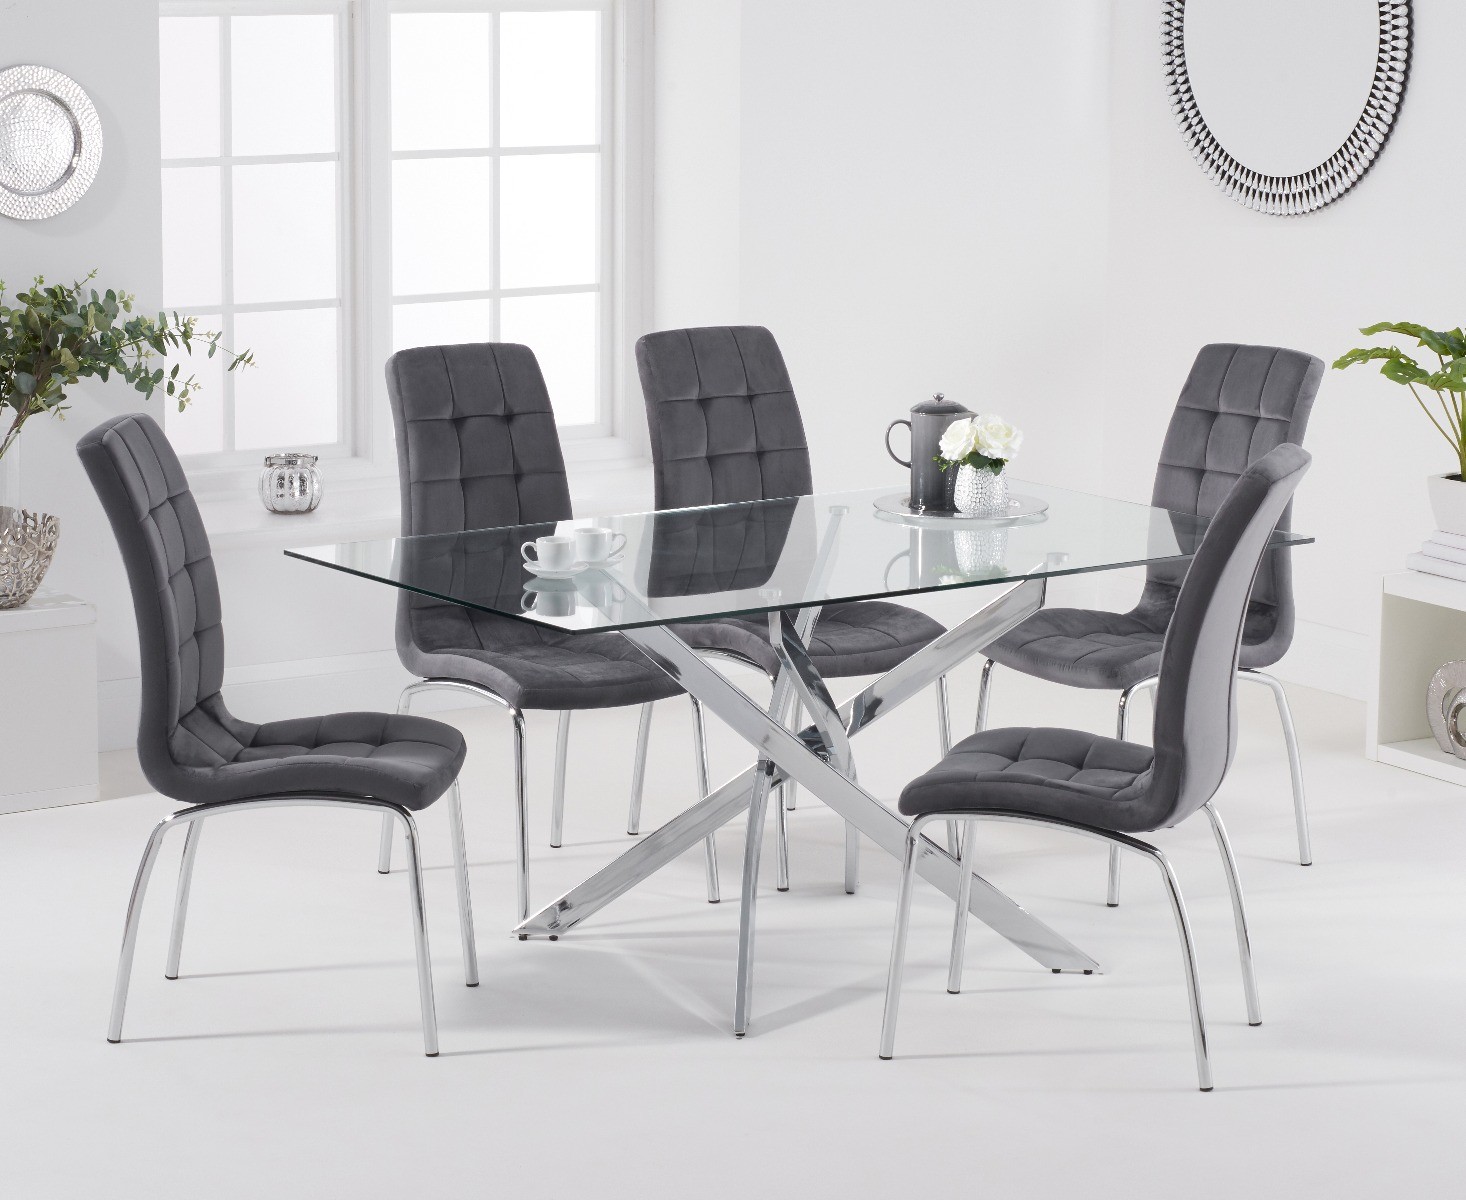 Denver 160cm Rectangular Glass Dining Table With 6 Grey Enzo Chairs